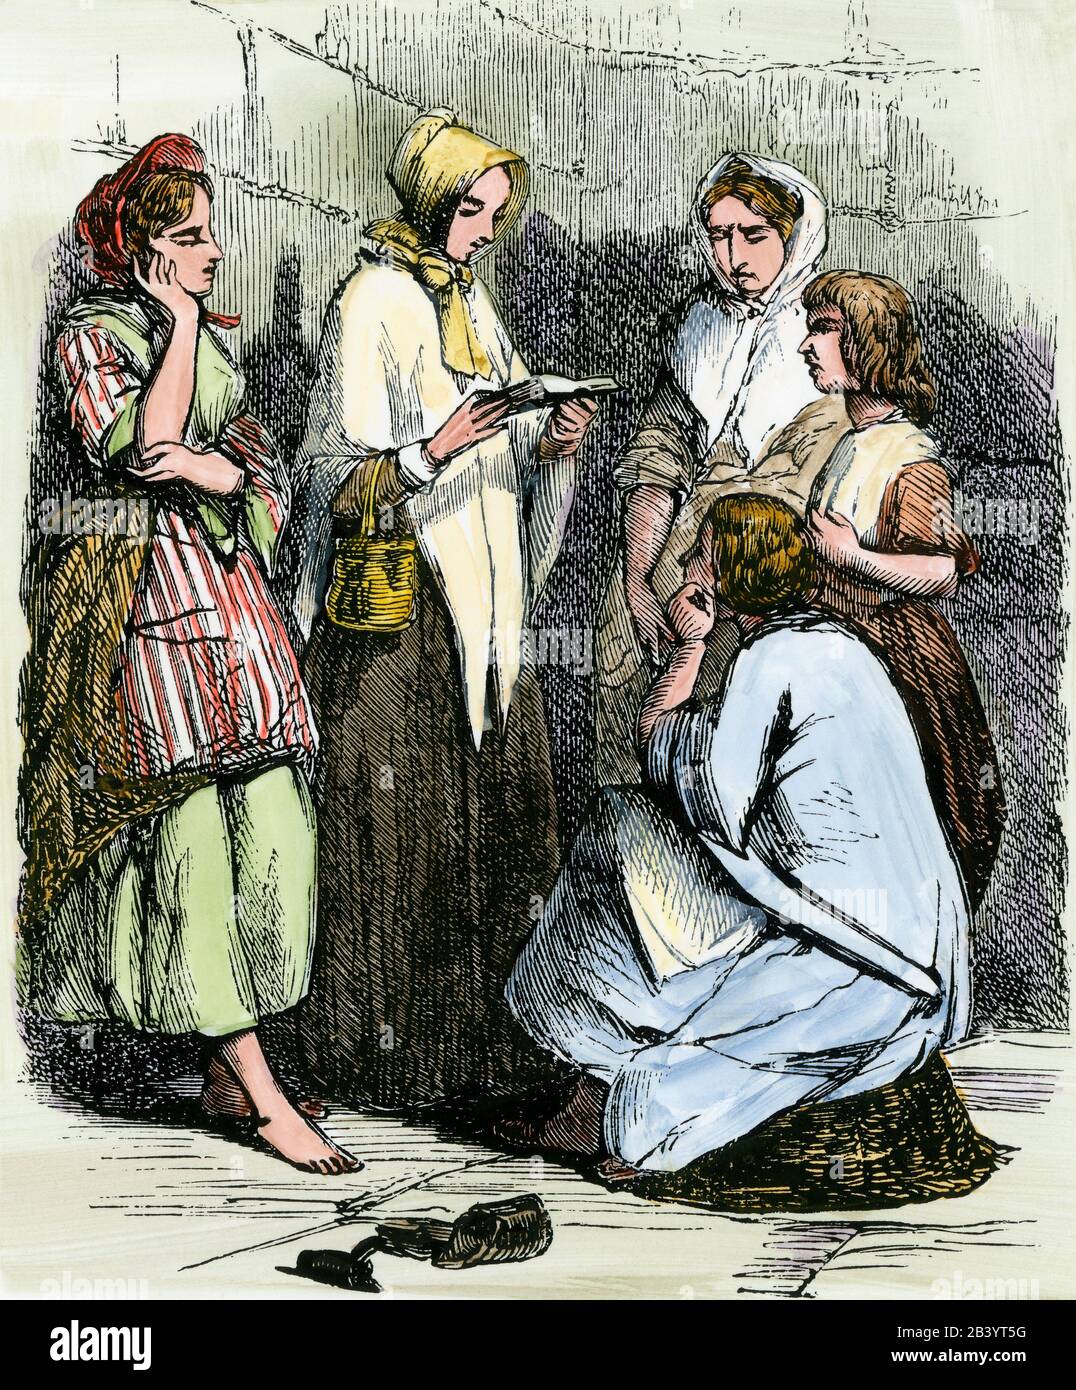 Elizabeth Fry reading the Bible to inmates of Newgate Prison, early 1800s. Hand-colored woodcut Stock Photo